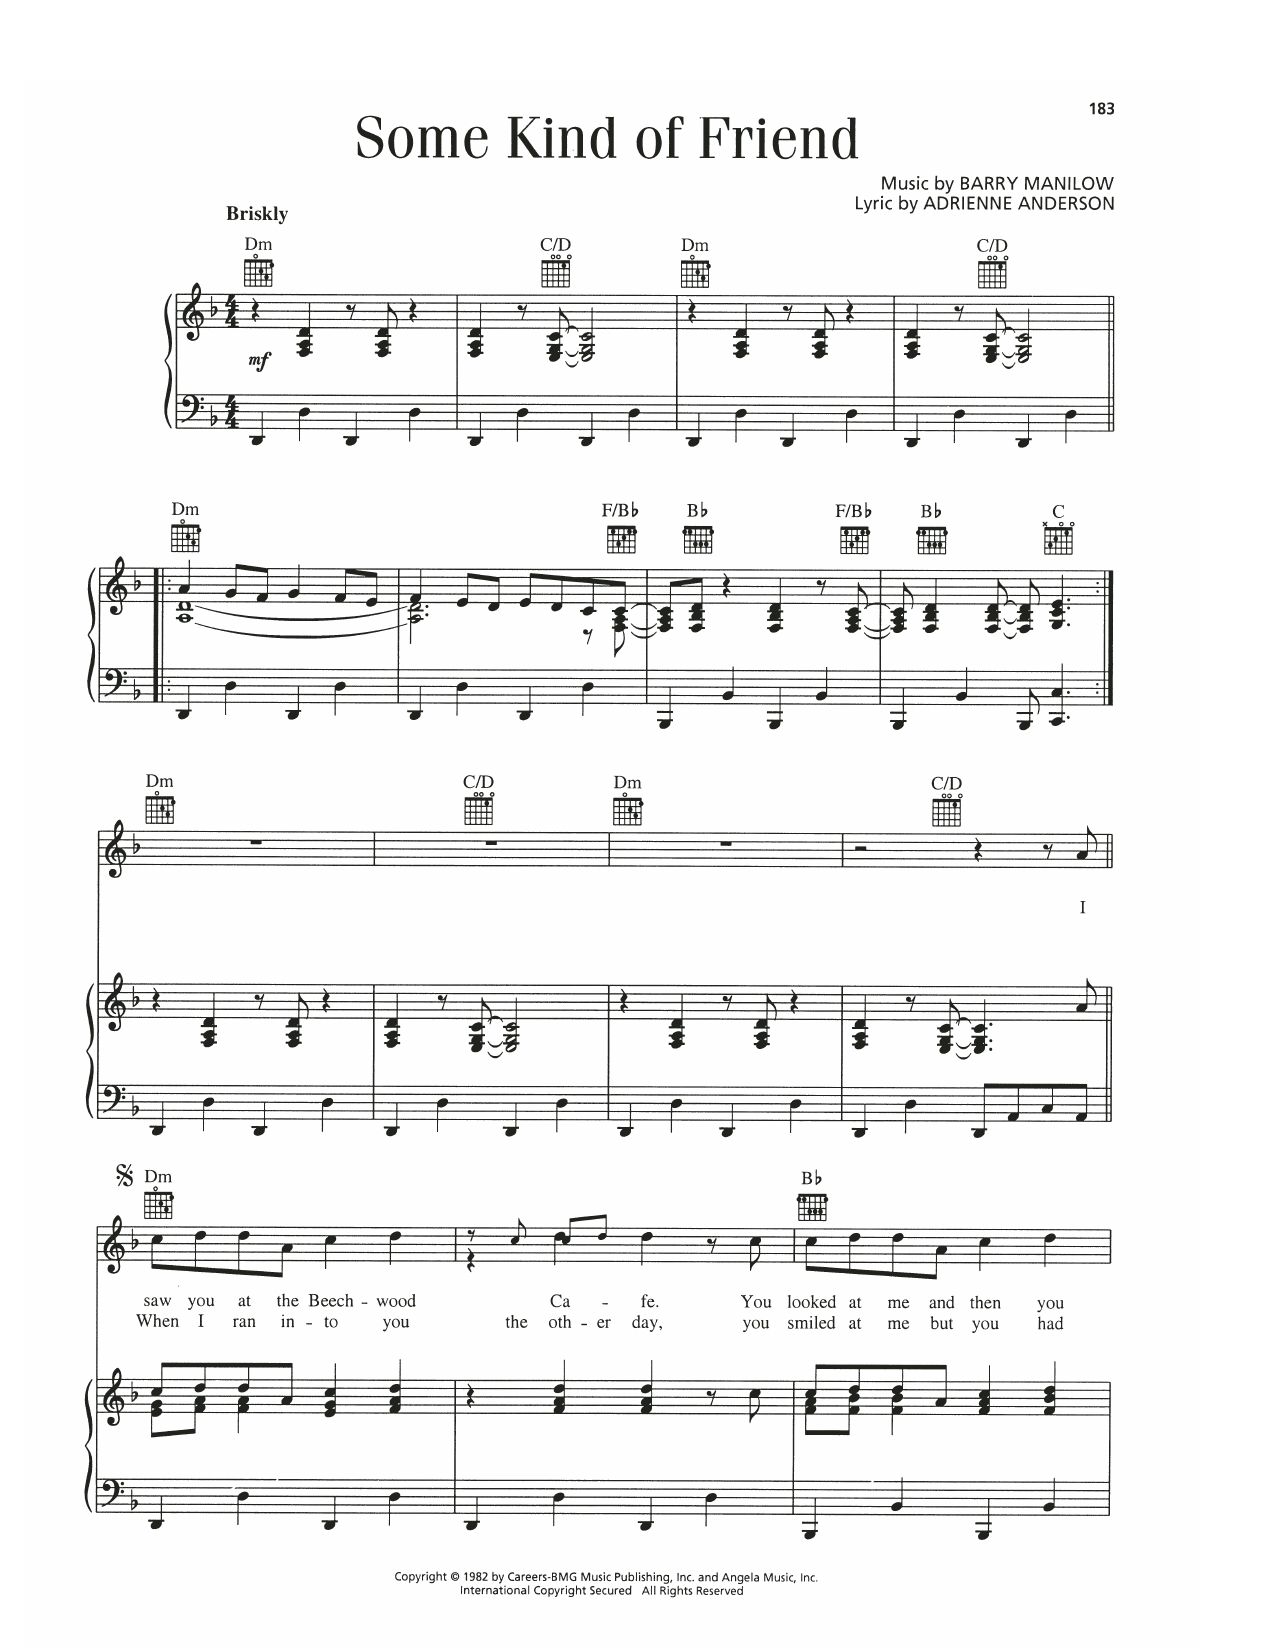 Download Barry Manilow Some Kind Of Friend Sheet Music